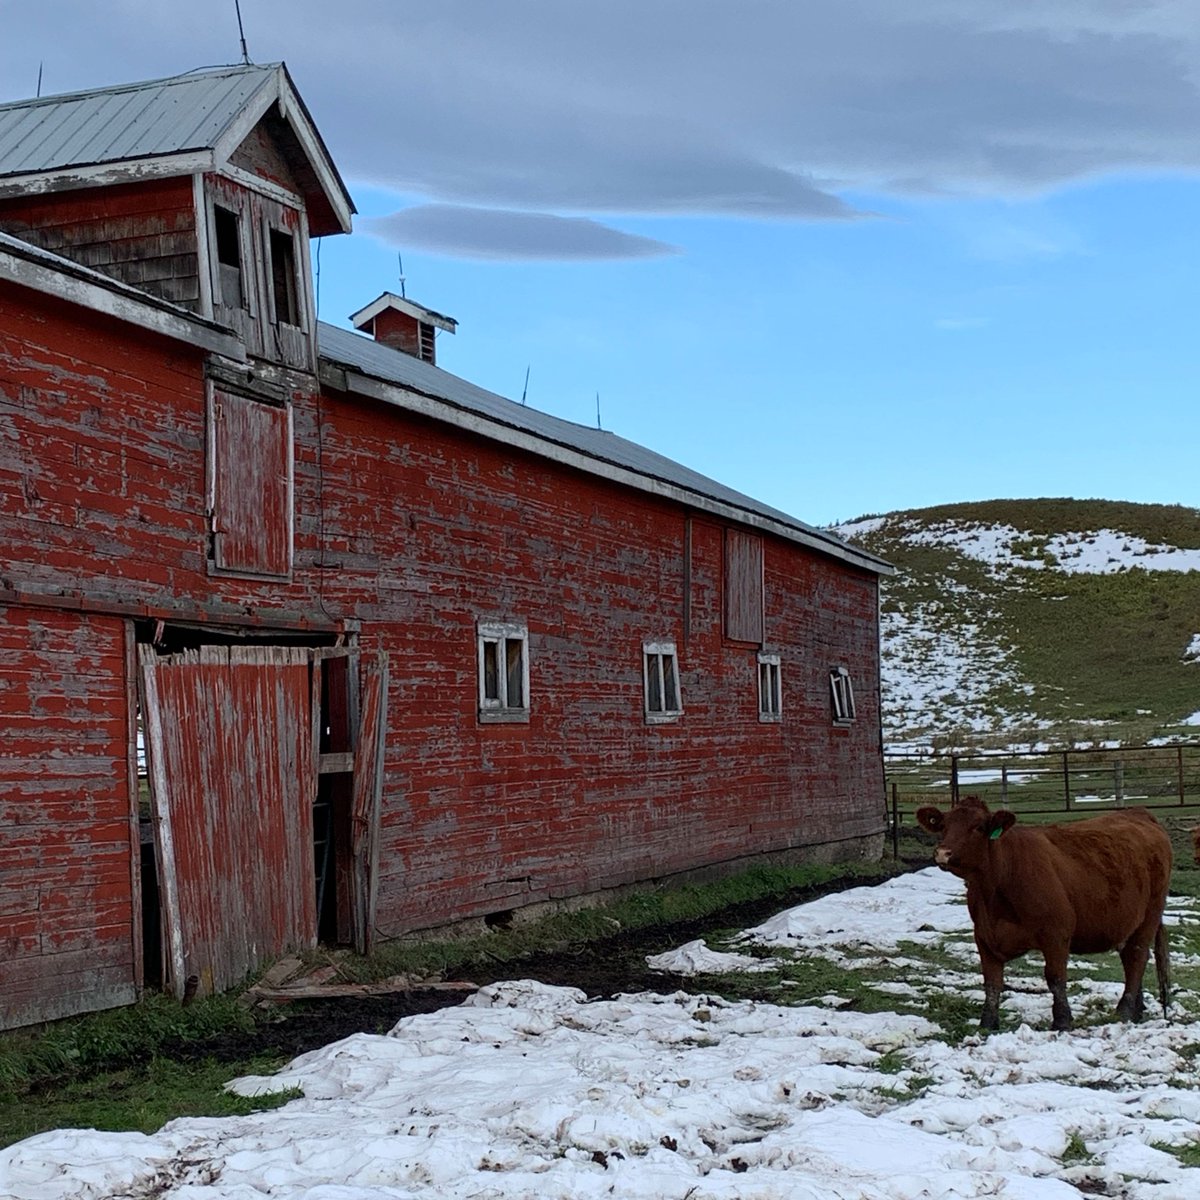 Is it spring yet? We are anxious to get back out into rural AB and start this years batch of beautiful buildings. 
.
#reclaim #history #reclaimation #barnteardown #dismantle #procure #salvage #restoringhistory #beautifuloldbuildings #abandonedalberta #alberta #albertahistory